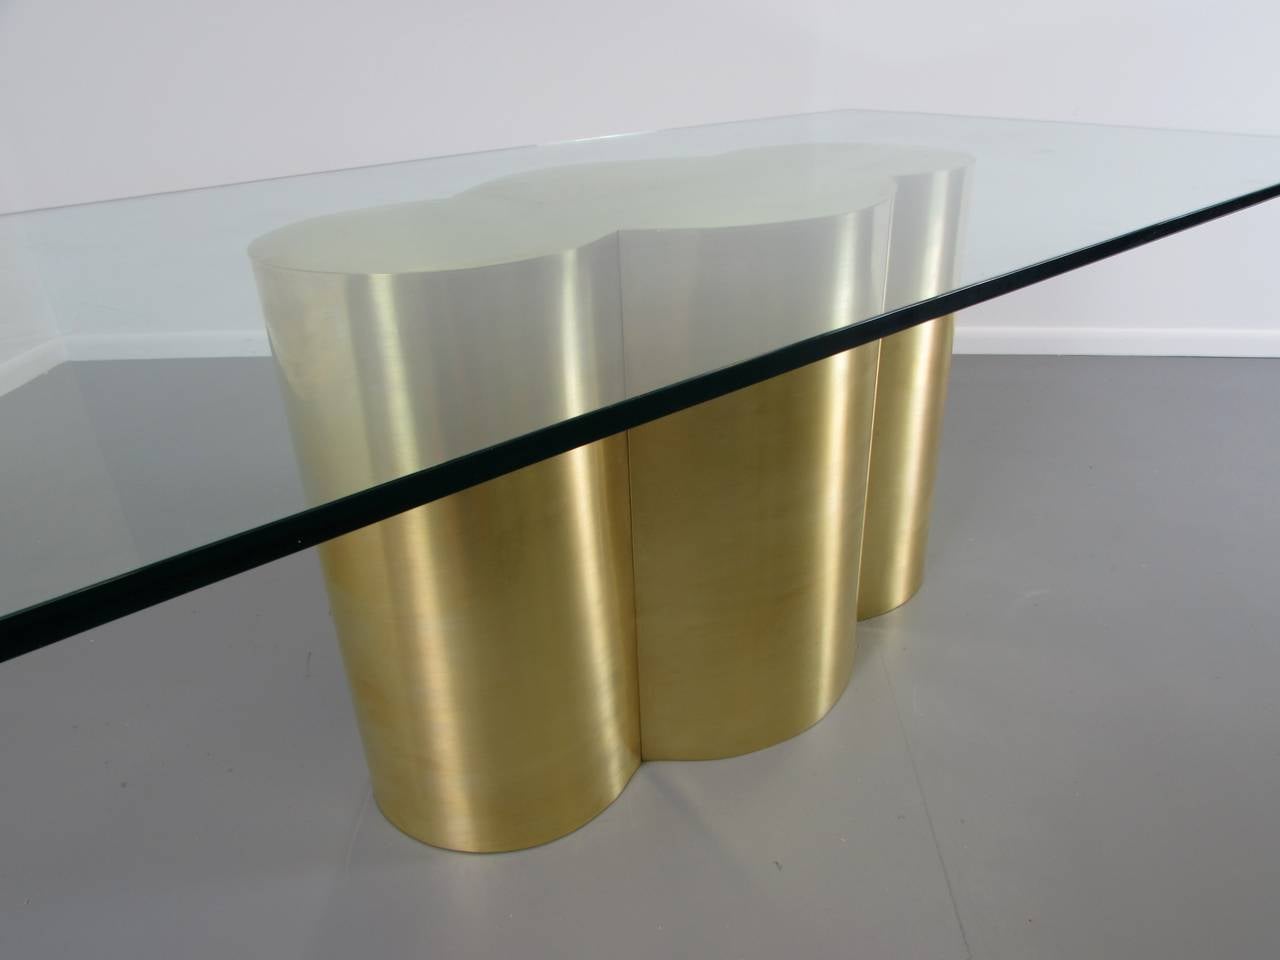 Contemporary Custom Quatrefoil Dining Table Base in Polished Brass by Refine Limited